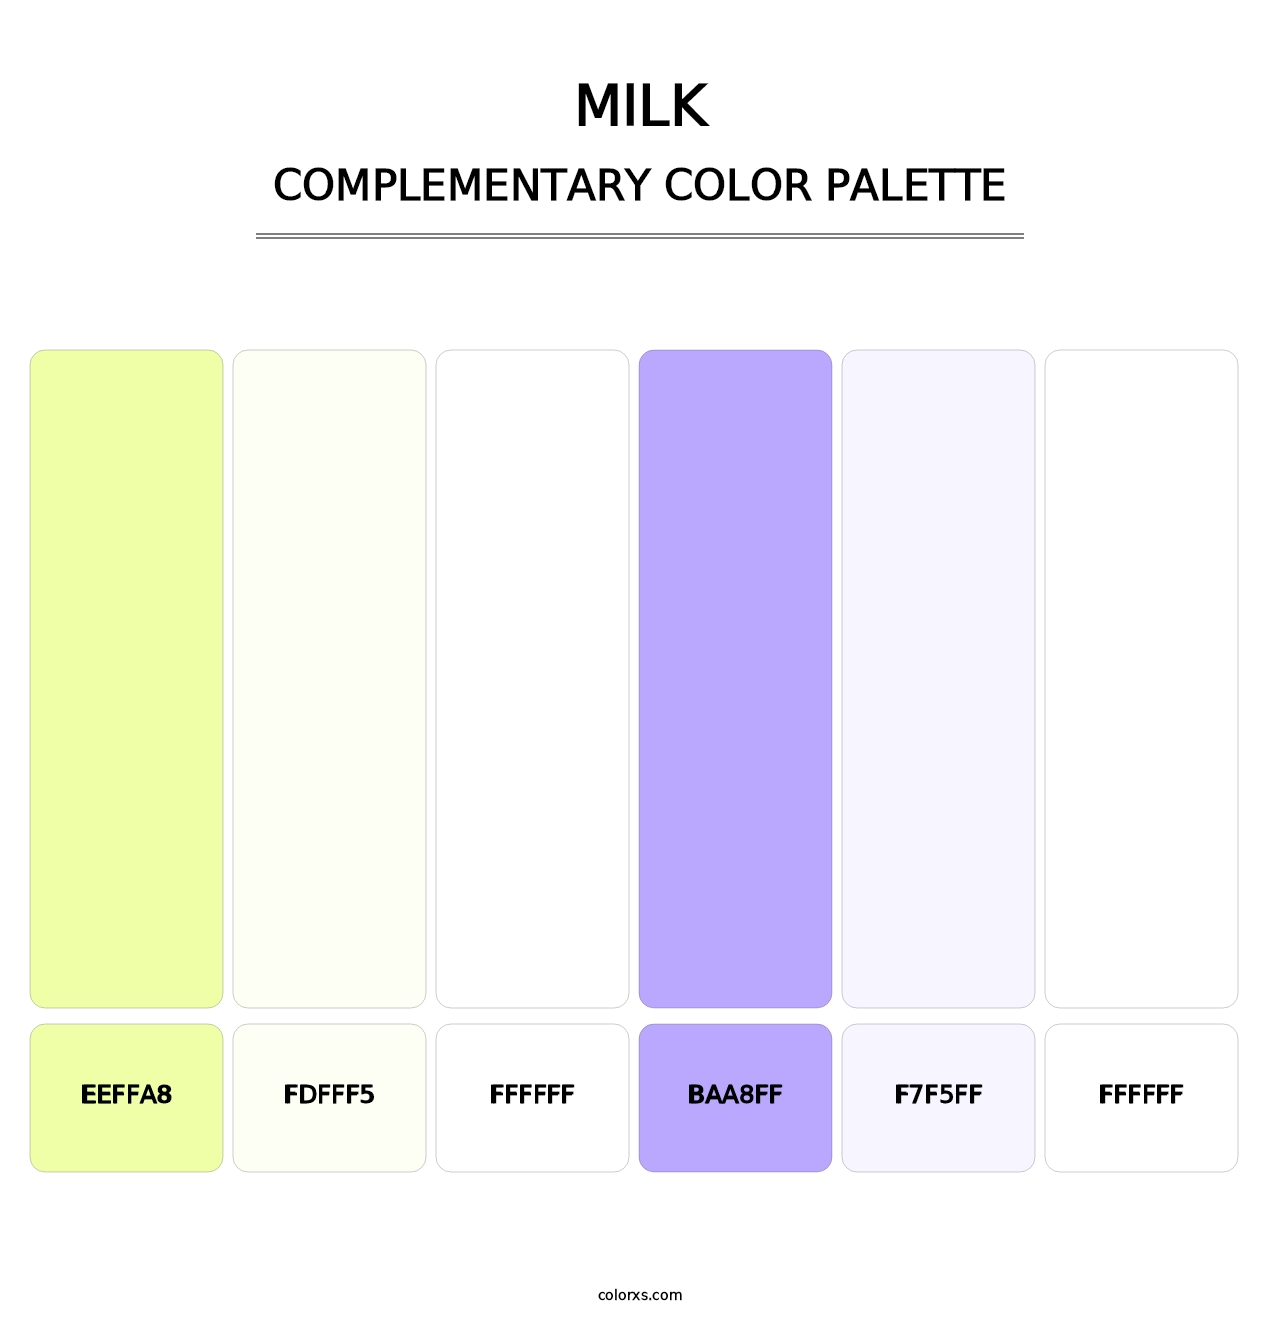 Milk - Complementary Color Palette